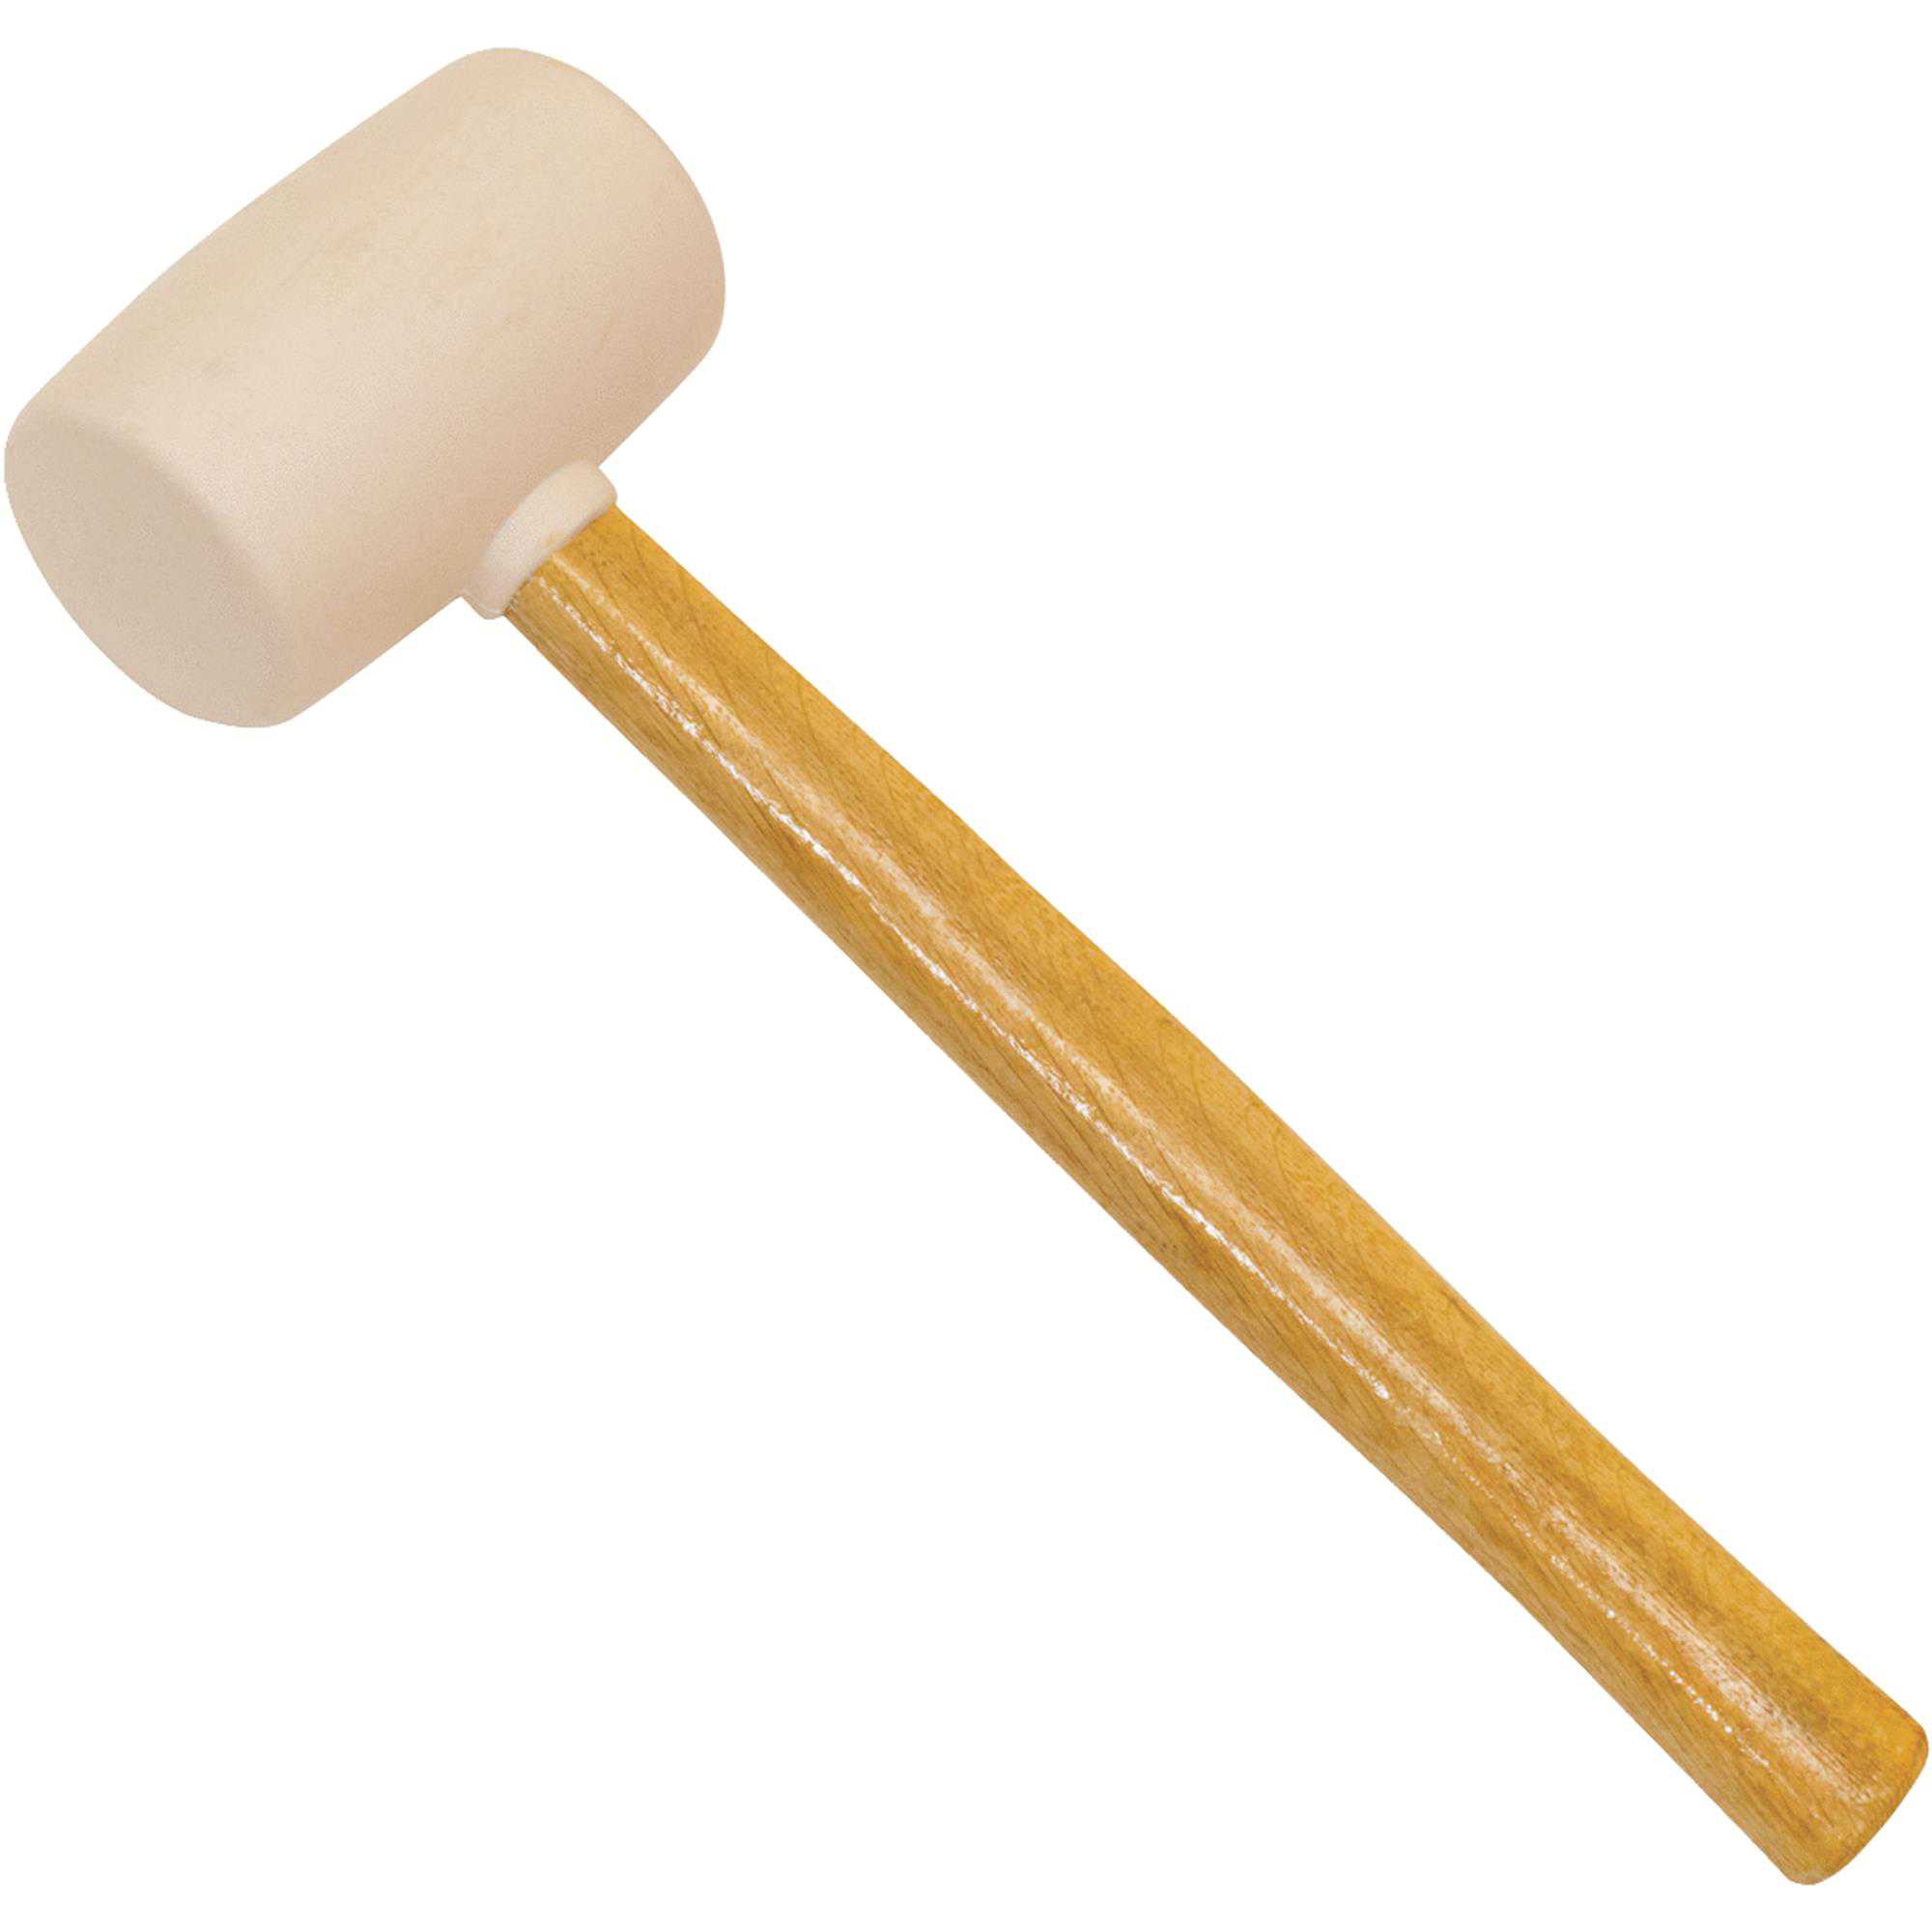 Great Neck Saw RMW16 16-Ounce Rubber Mallet Wood Handle